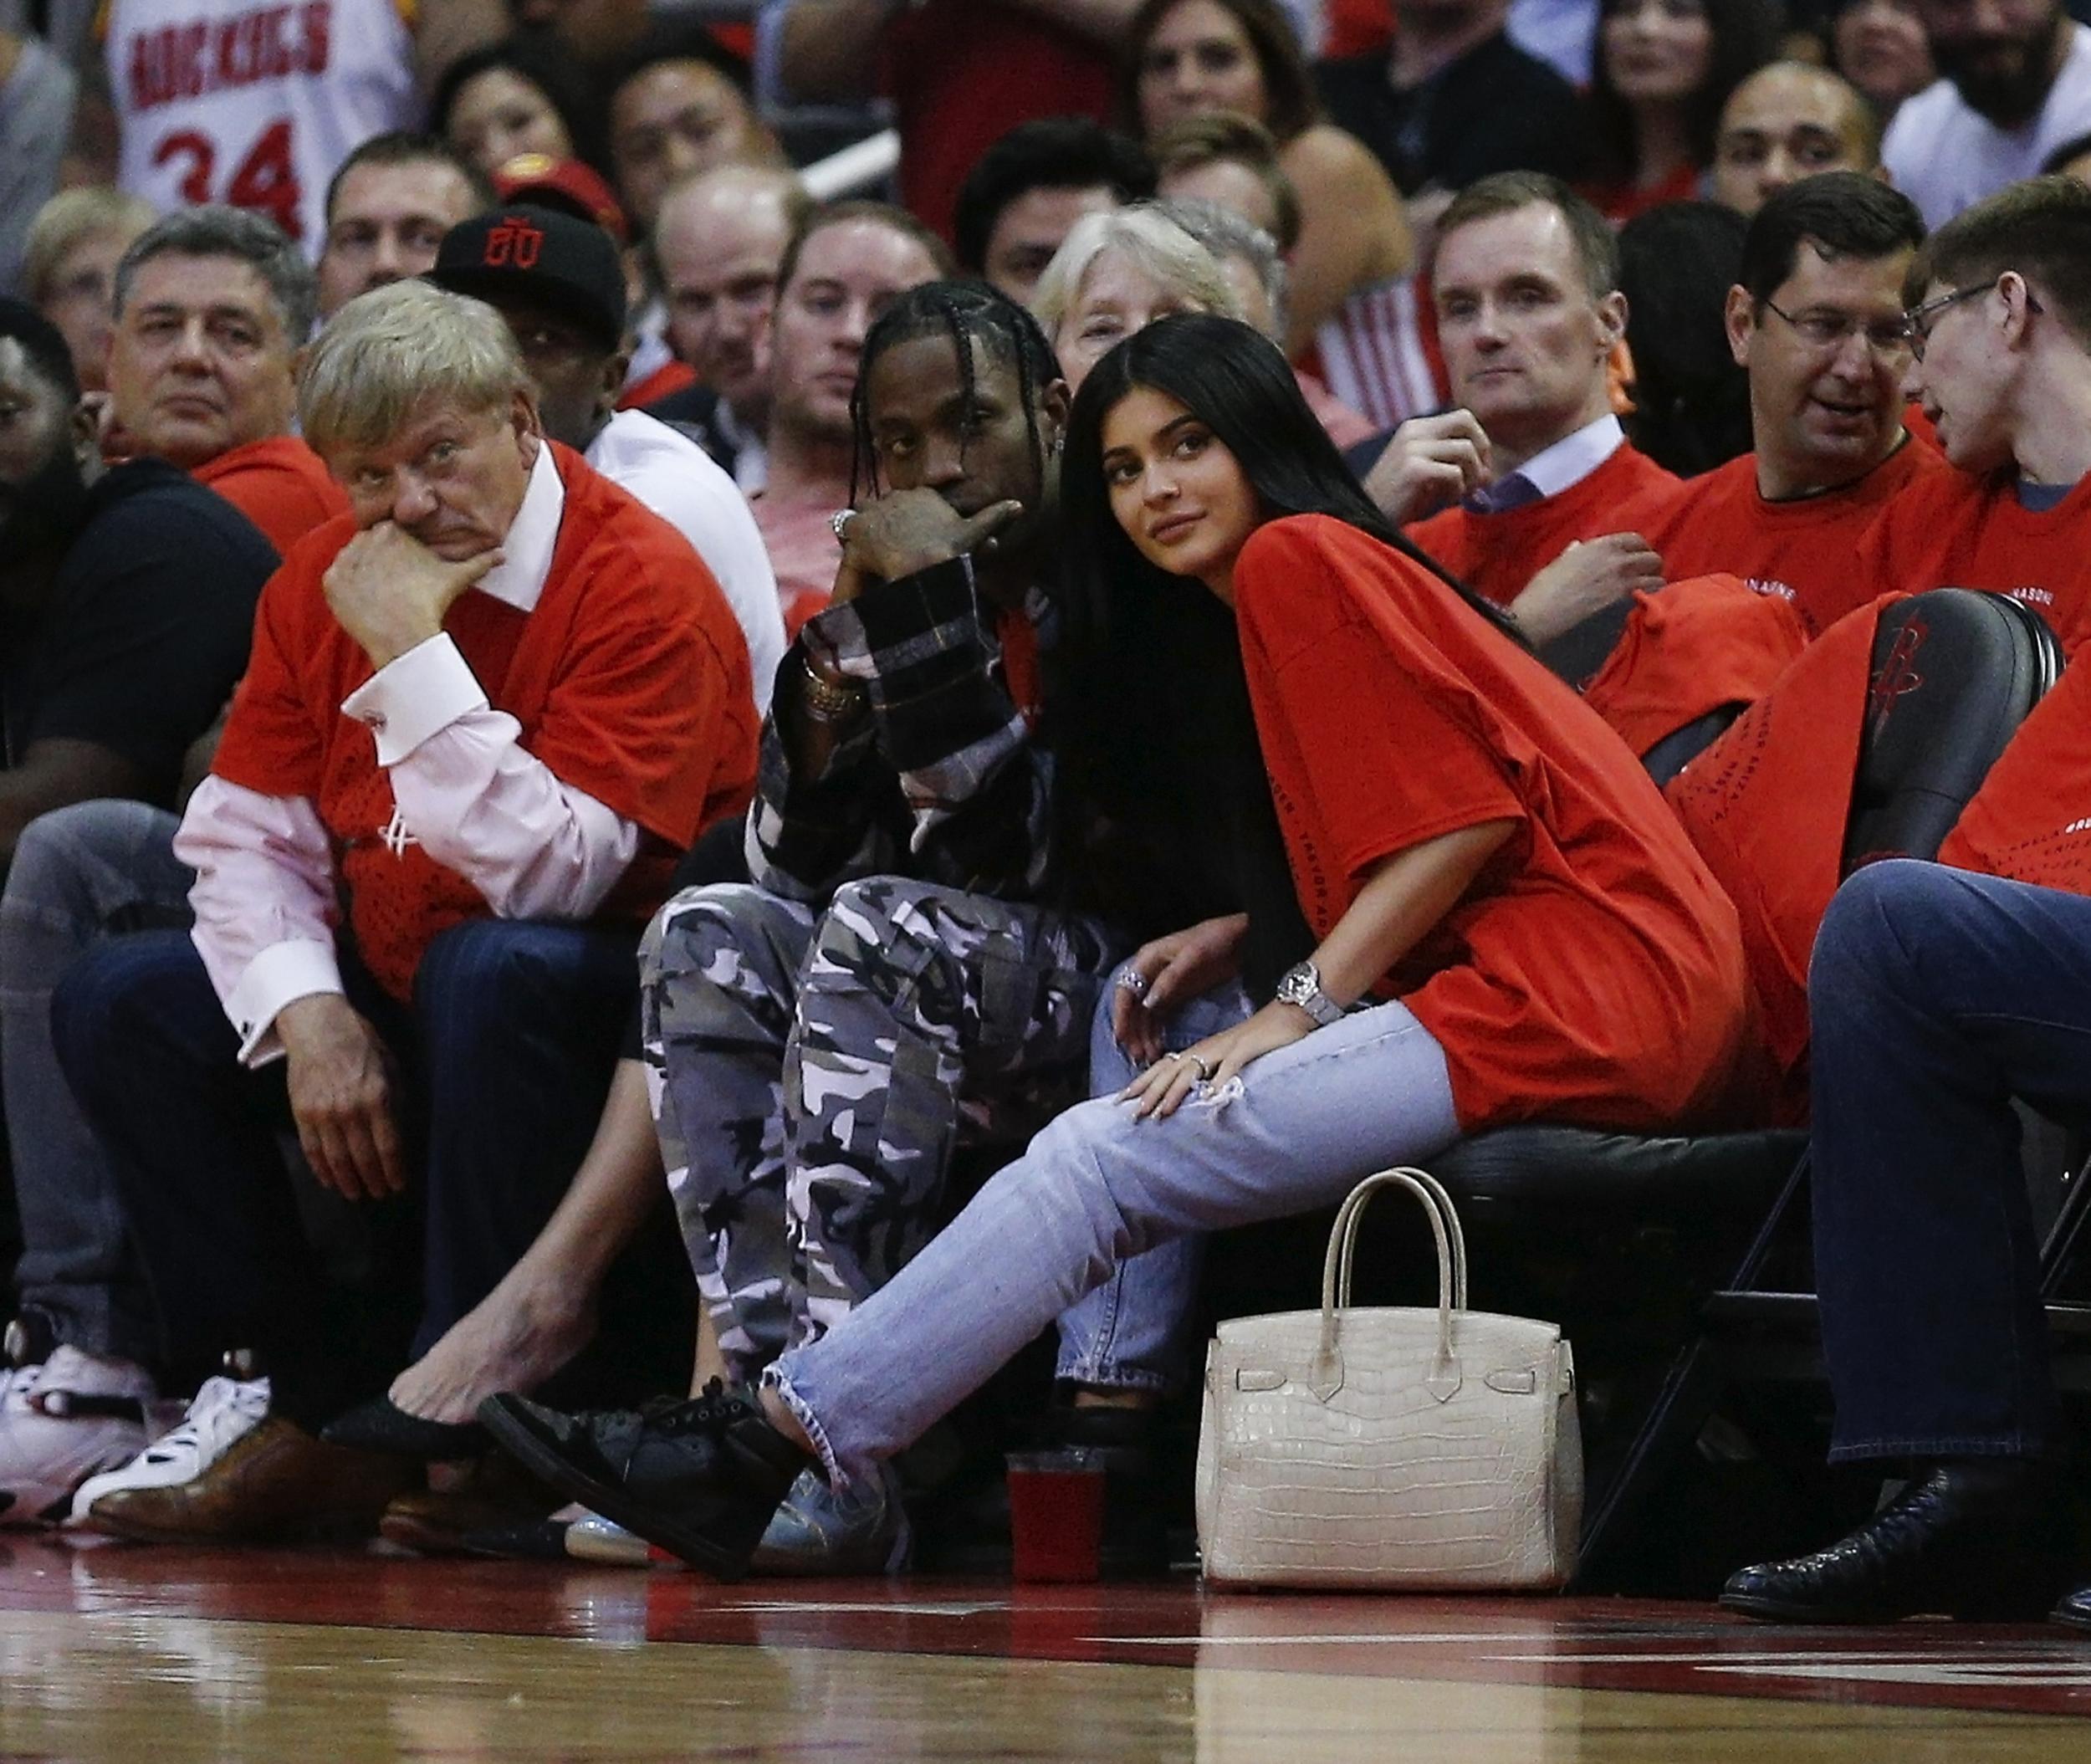 Travis Scott and Kylie Jenner. Credit: Bob Levey/Getty Images